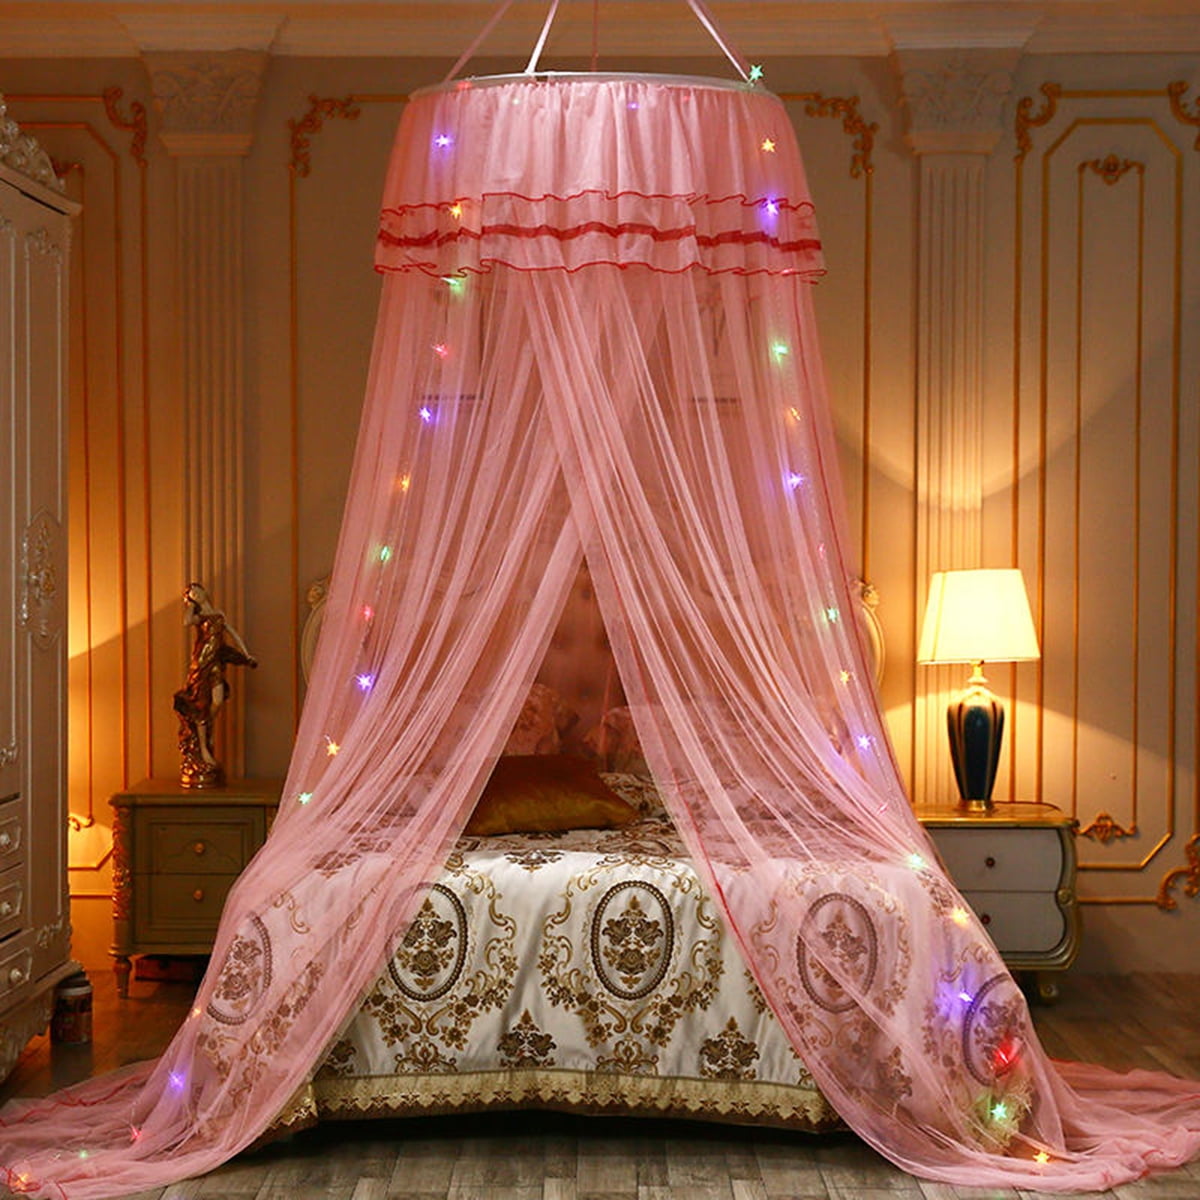 Mosquito Net For Kids Elegant Ruffle Lace Bed Canopy Dome Princess Protect Baby 